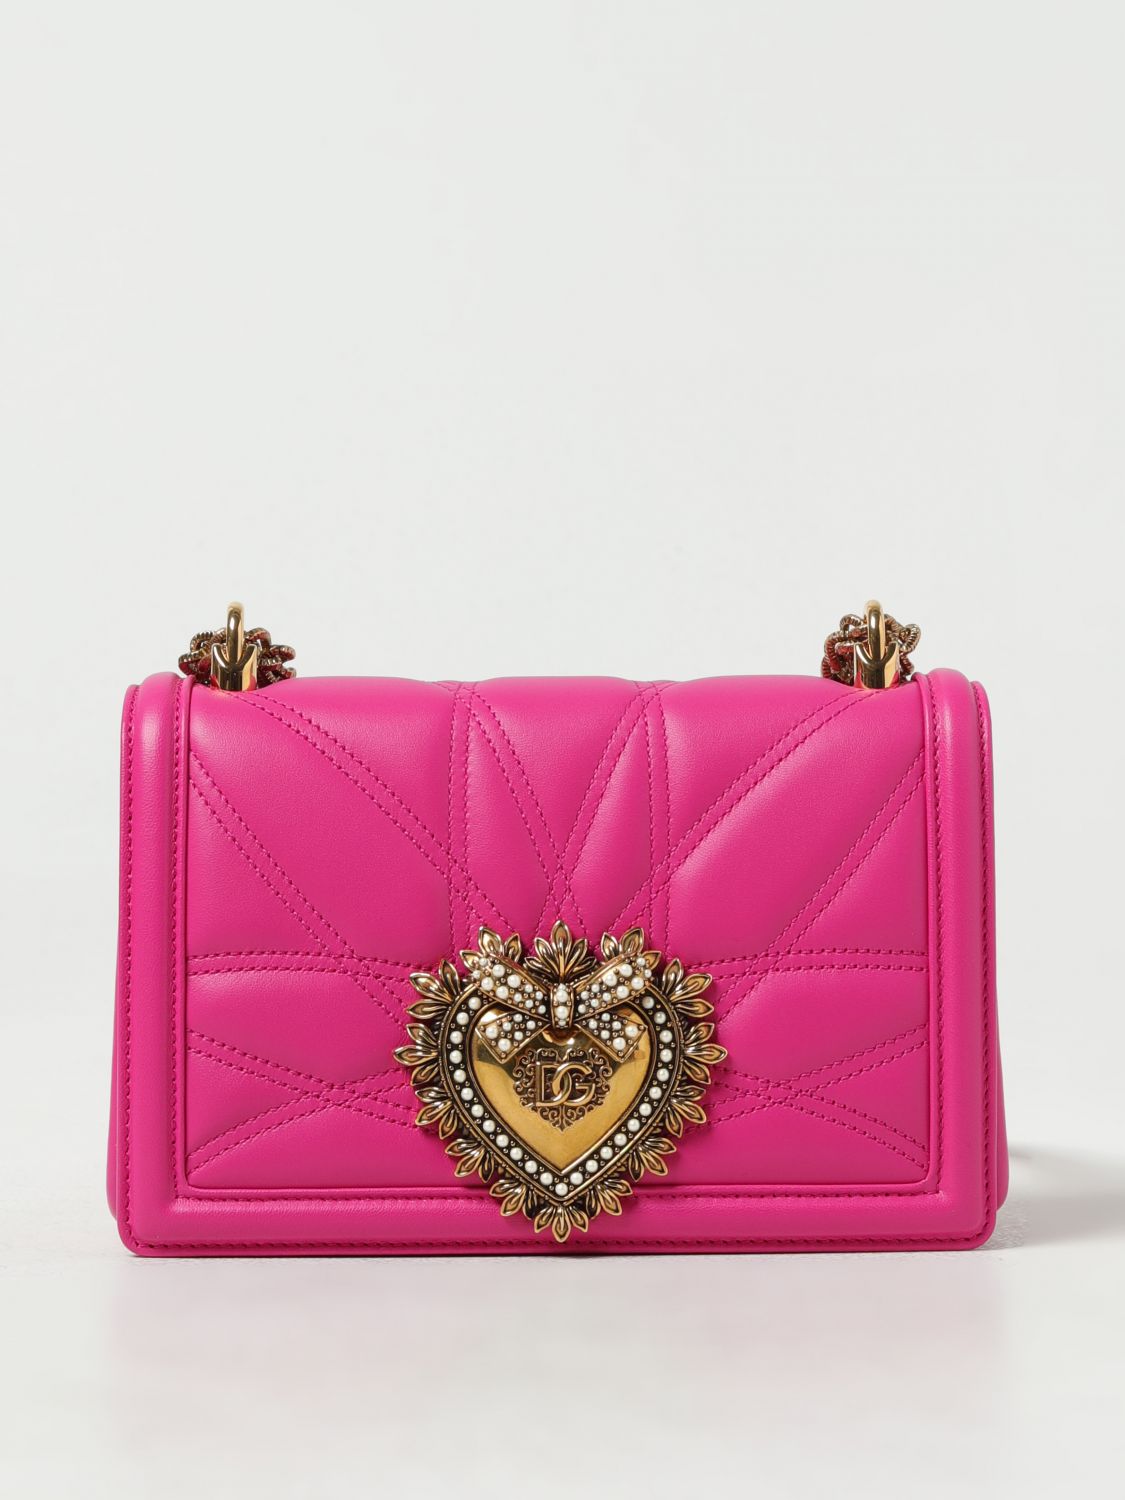 Dolce & Gabbana Devotion Bag In Quilted Leather In Fuchsia